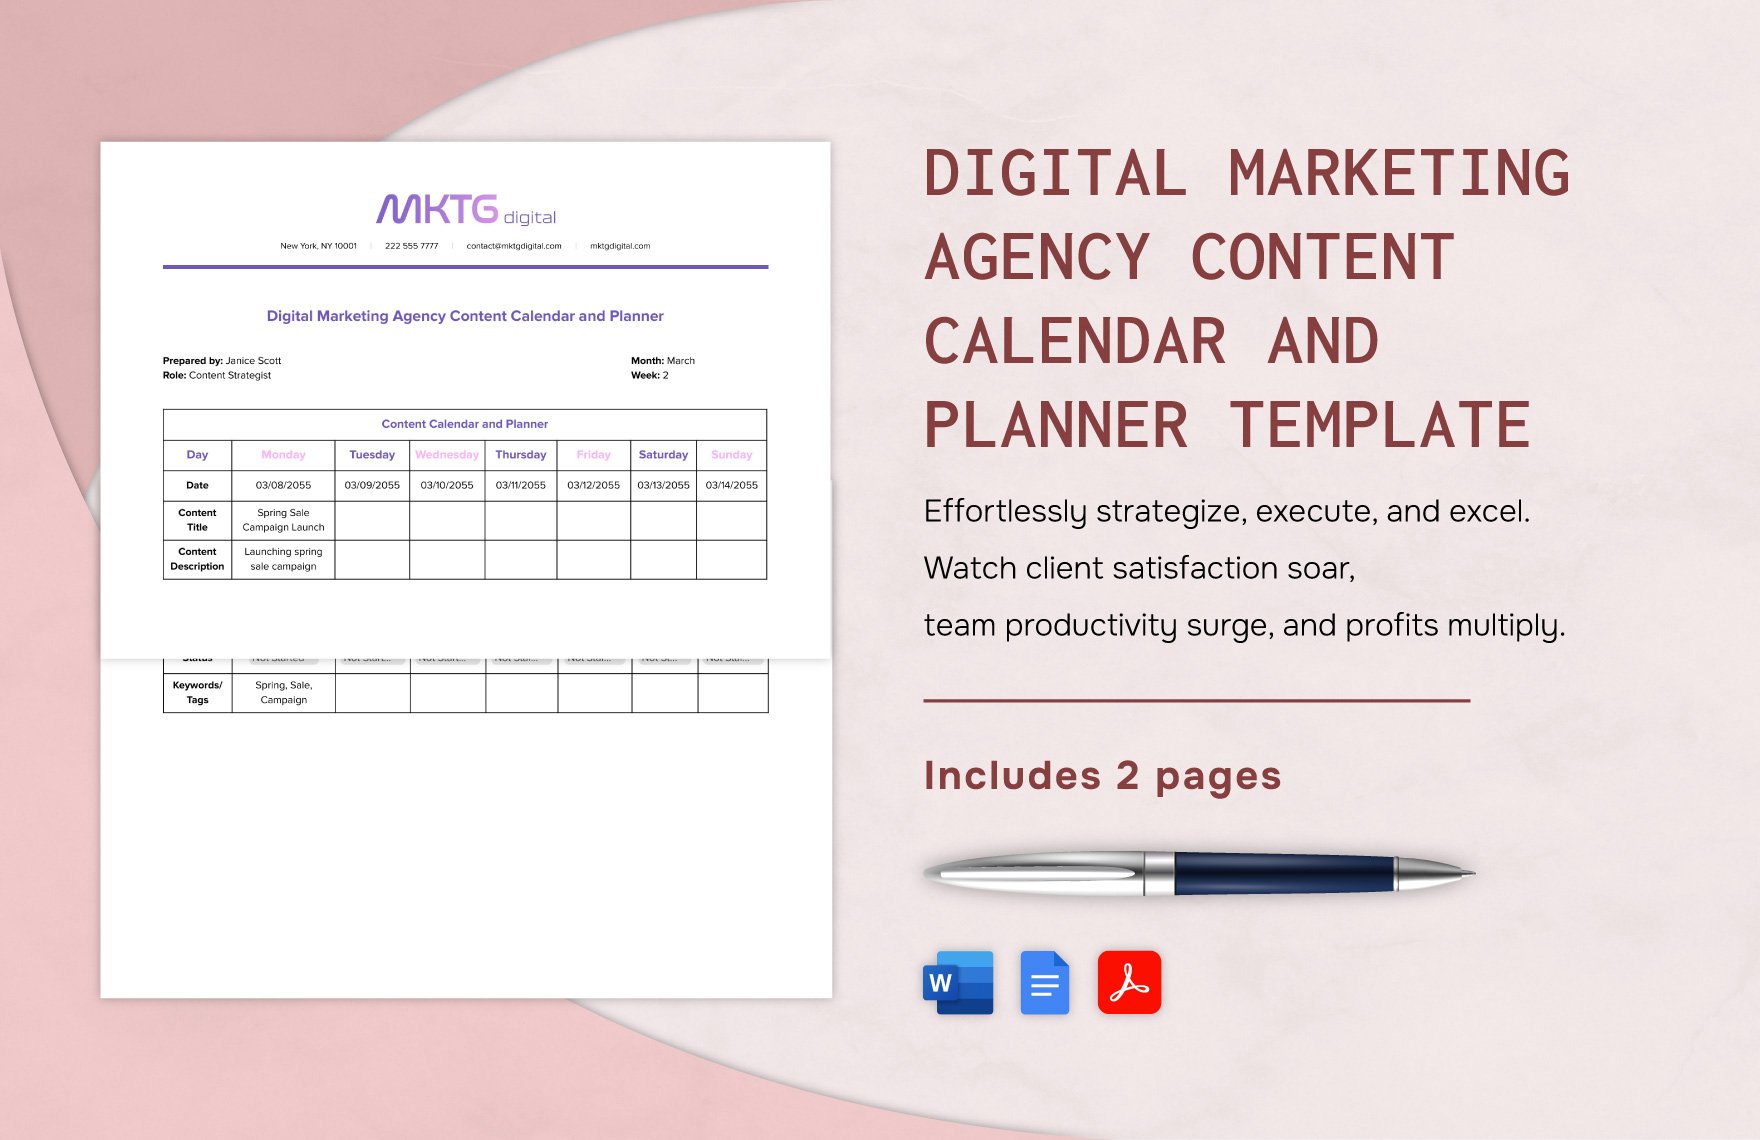 Digital Marketing Agency Content Calendar and Planner Template